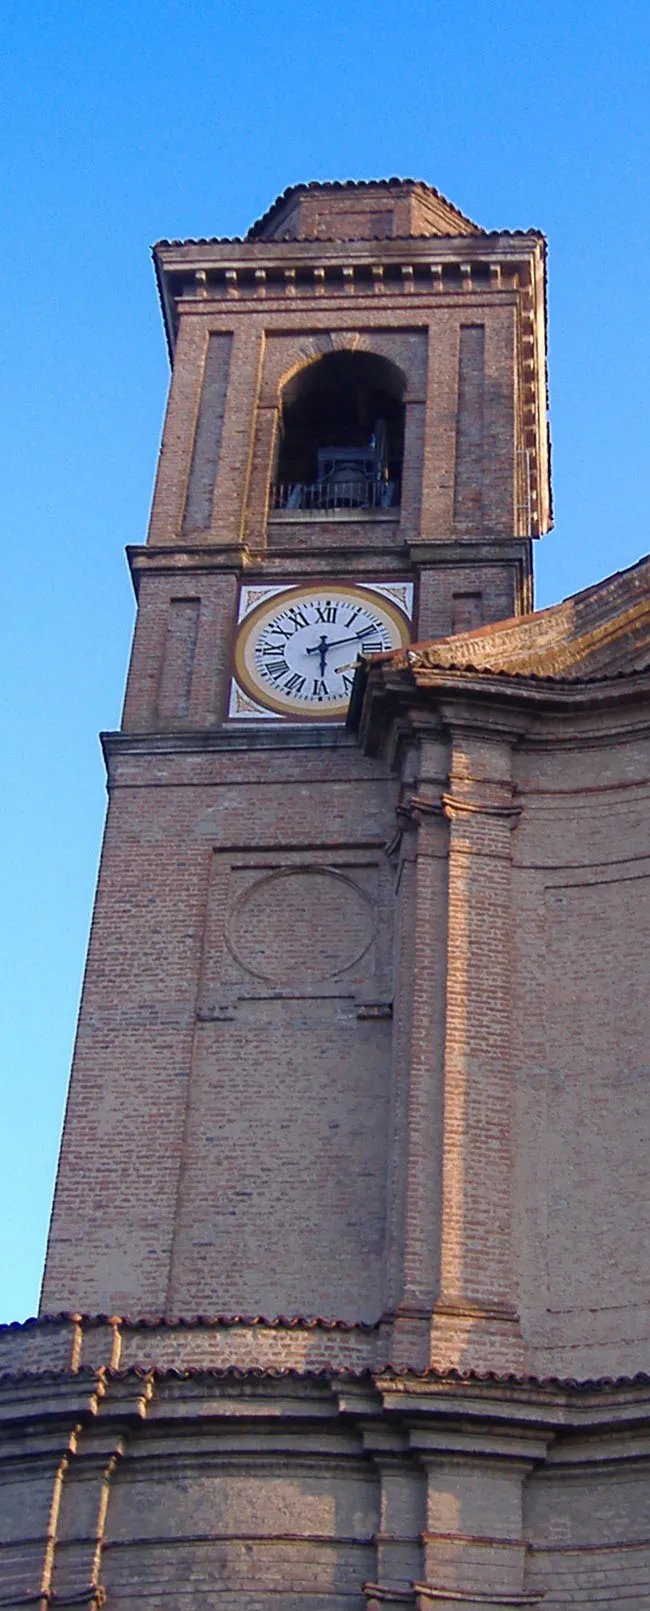 Photo showing: The clock tower of Santo Stefano Lodigiano, Italy